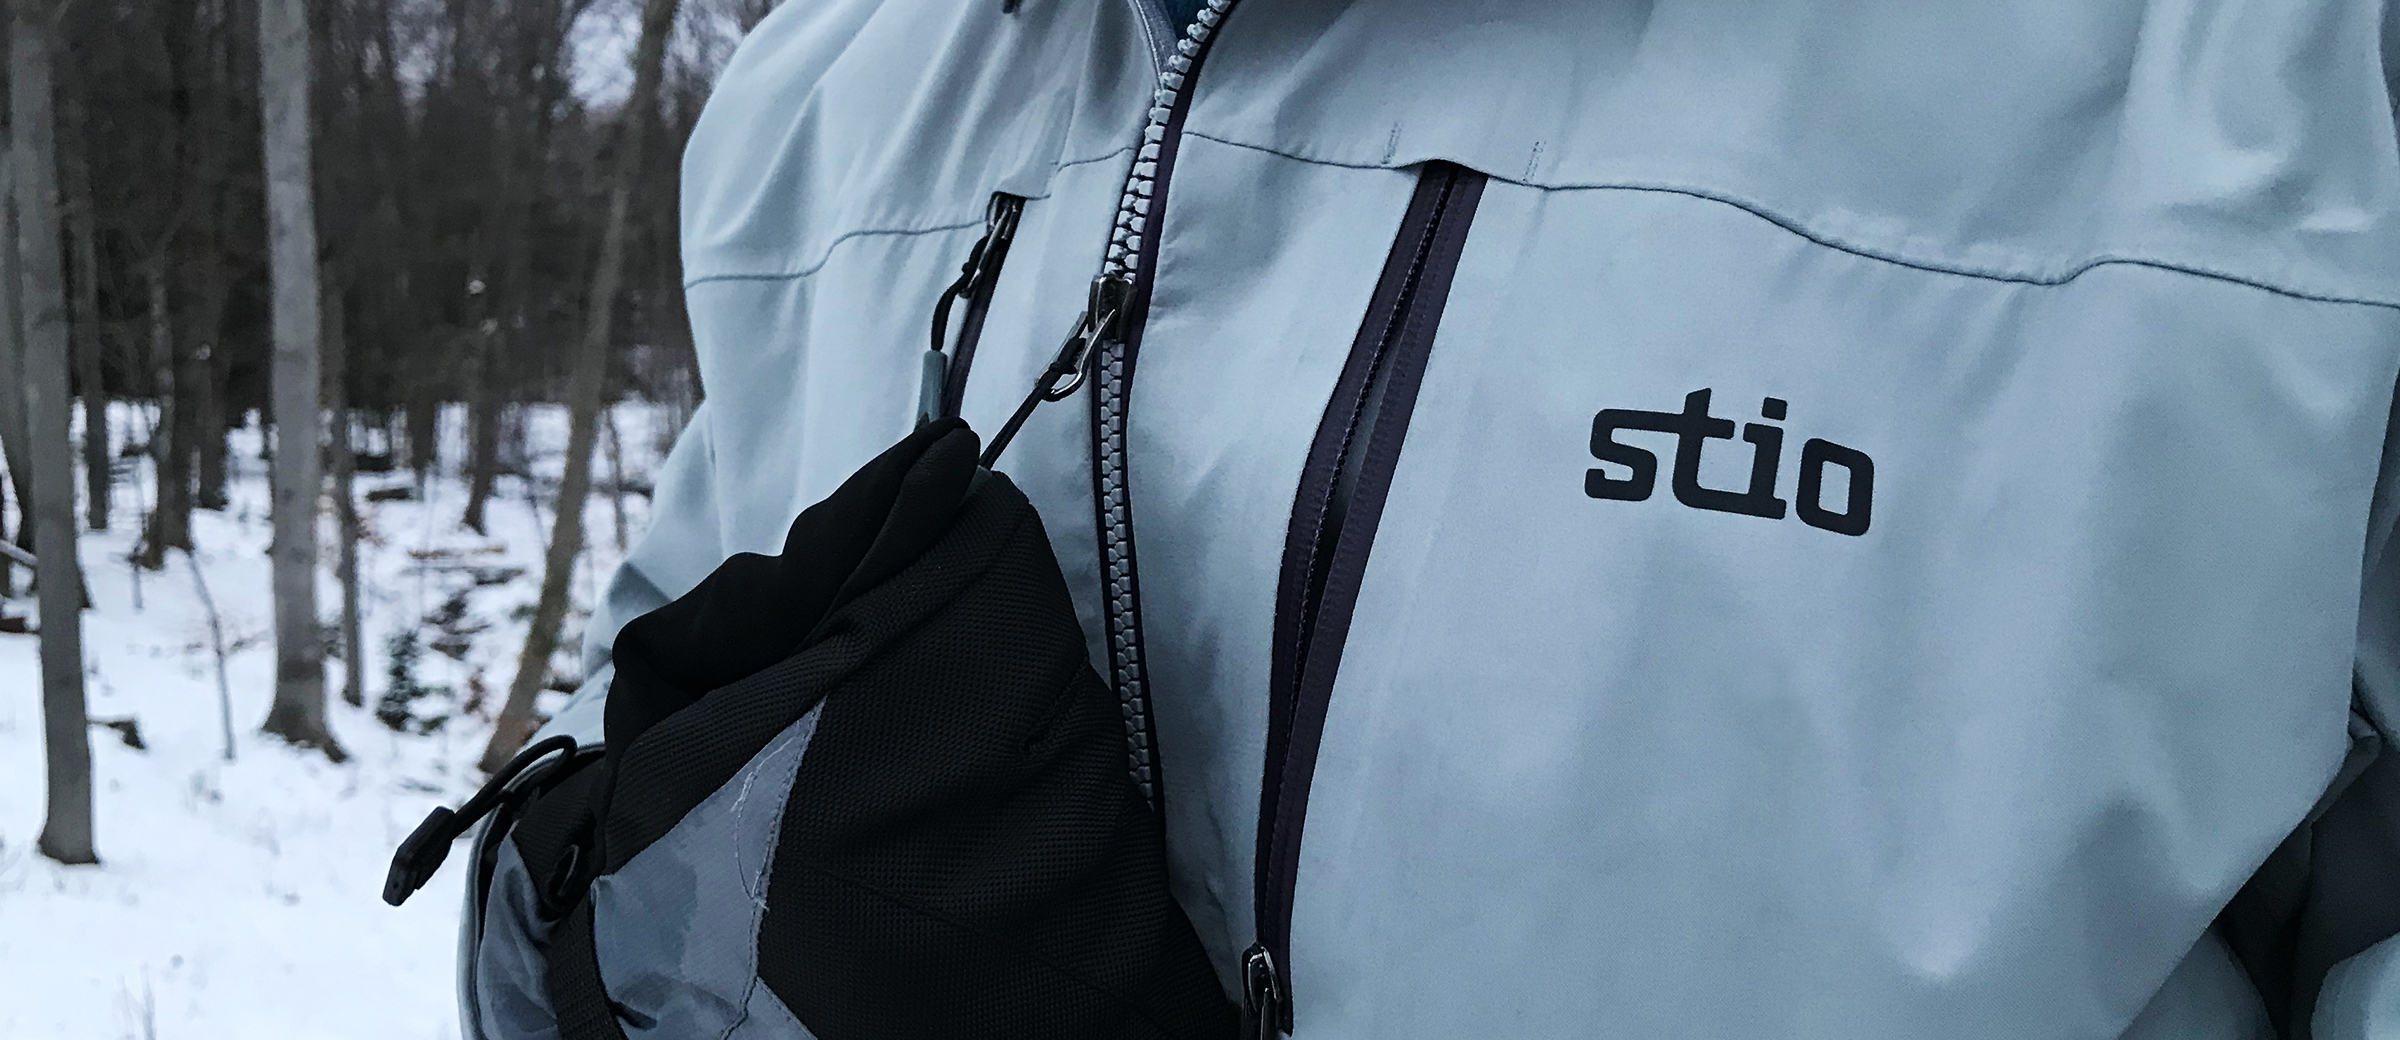 Stio Environ Jacket - Gear Review | Busted Wallet